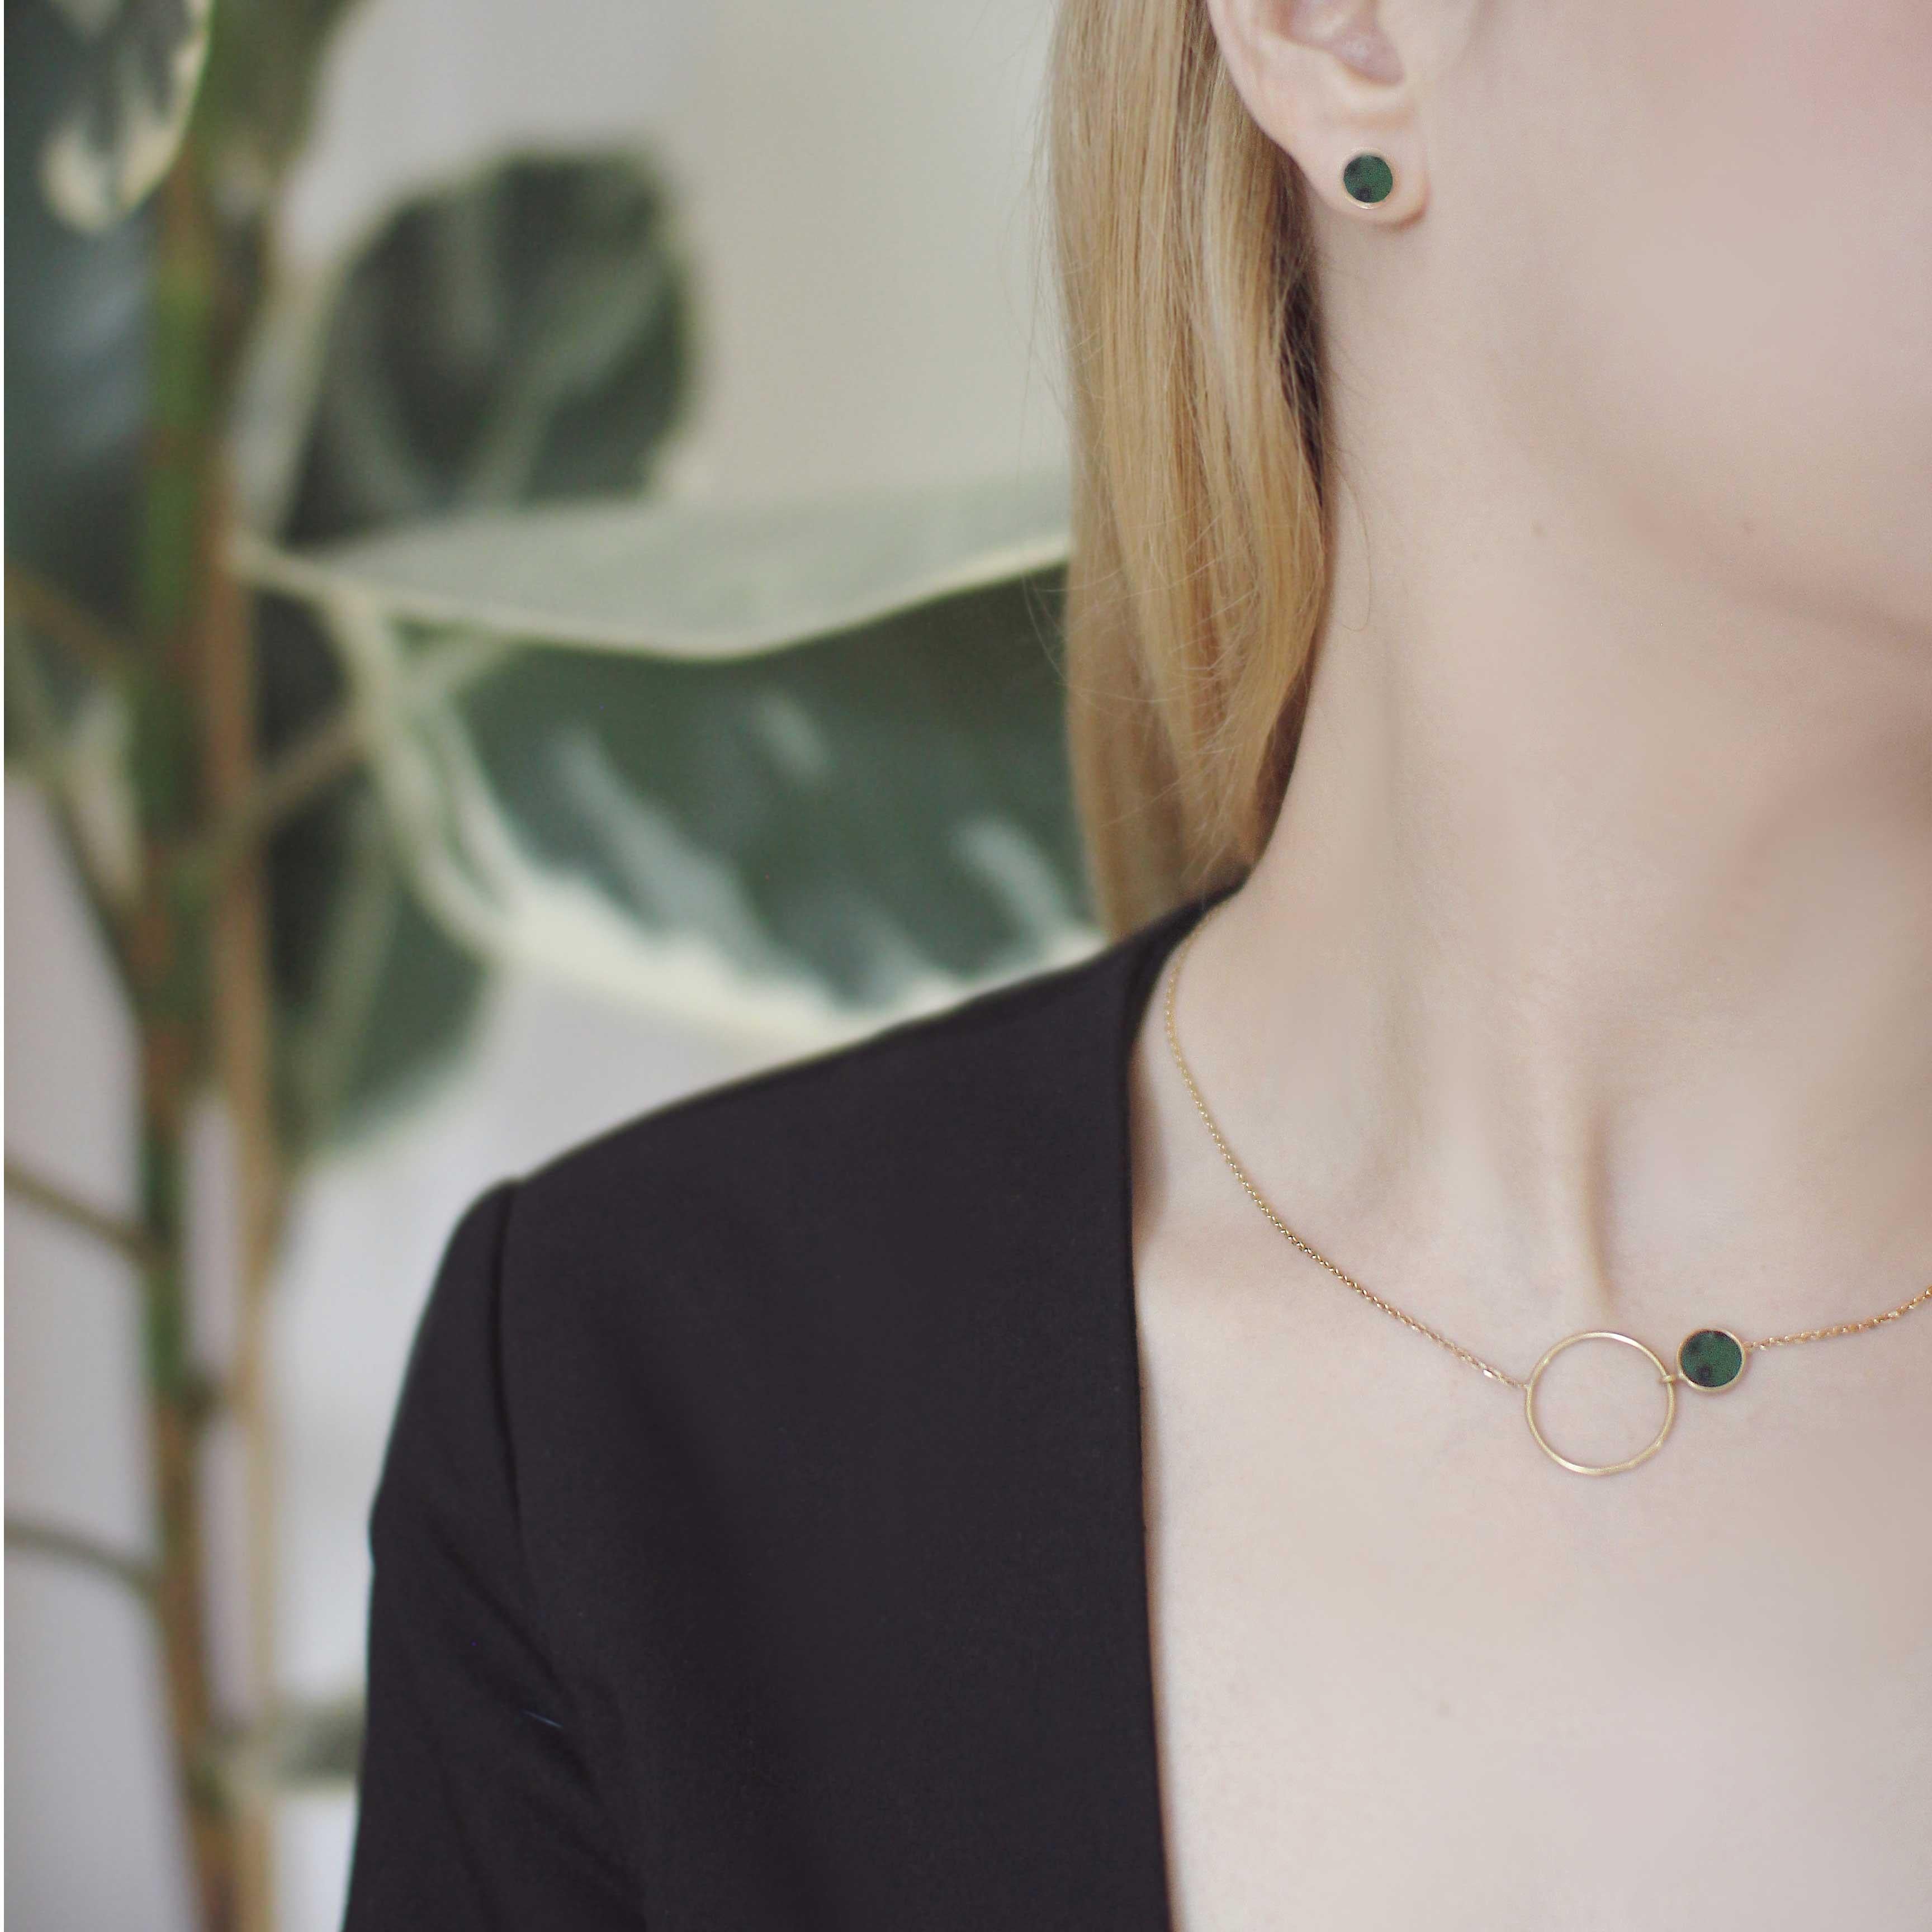 Our bestseller necklace from Circles collection with a green marbled stone is the quintessence of timeless elegance. Its design refers to the perfection of the circle - a symbol of completeness, harmony and femininity. You can wear this necklace on